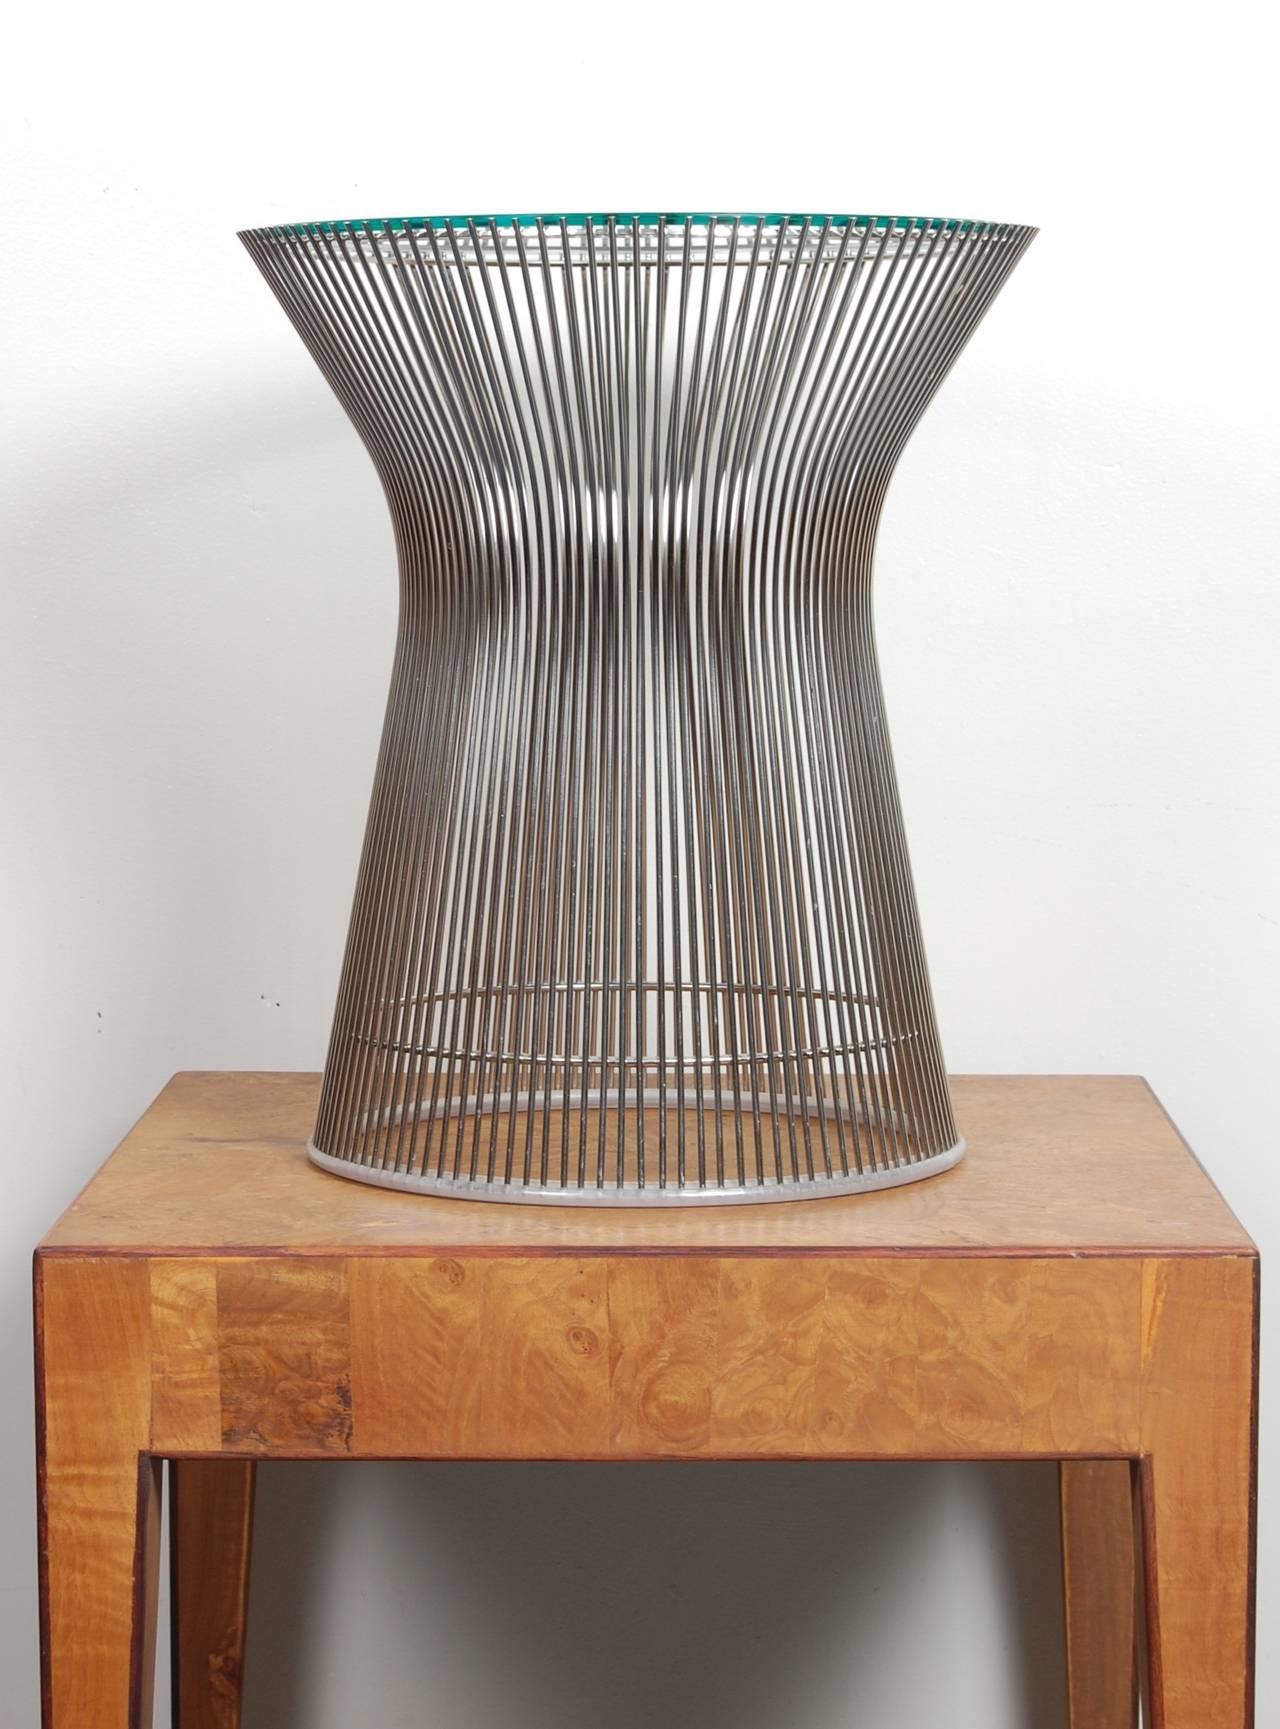 Nickel-plated wire bodied side table by American Architect Warren Platner for Knoll furniture. Atop the hourglass shaped welded wire frame is a circular inset glass top. The array of wire rods in its construction creates an interesting visual